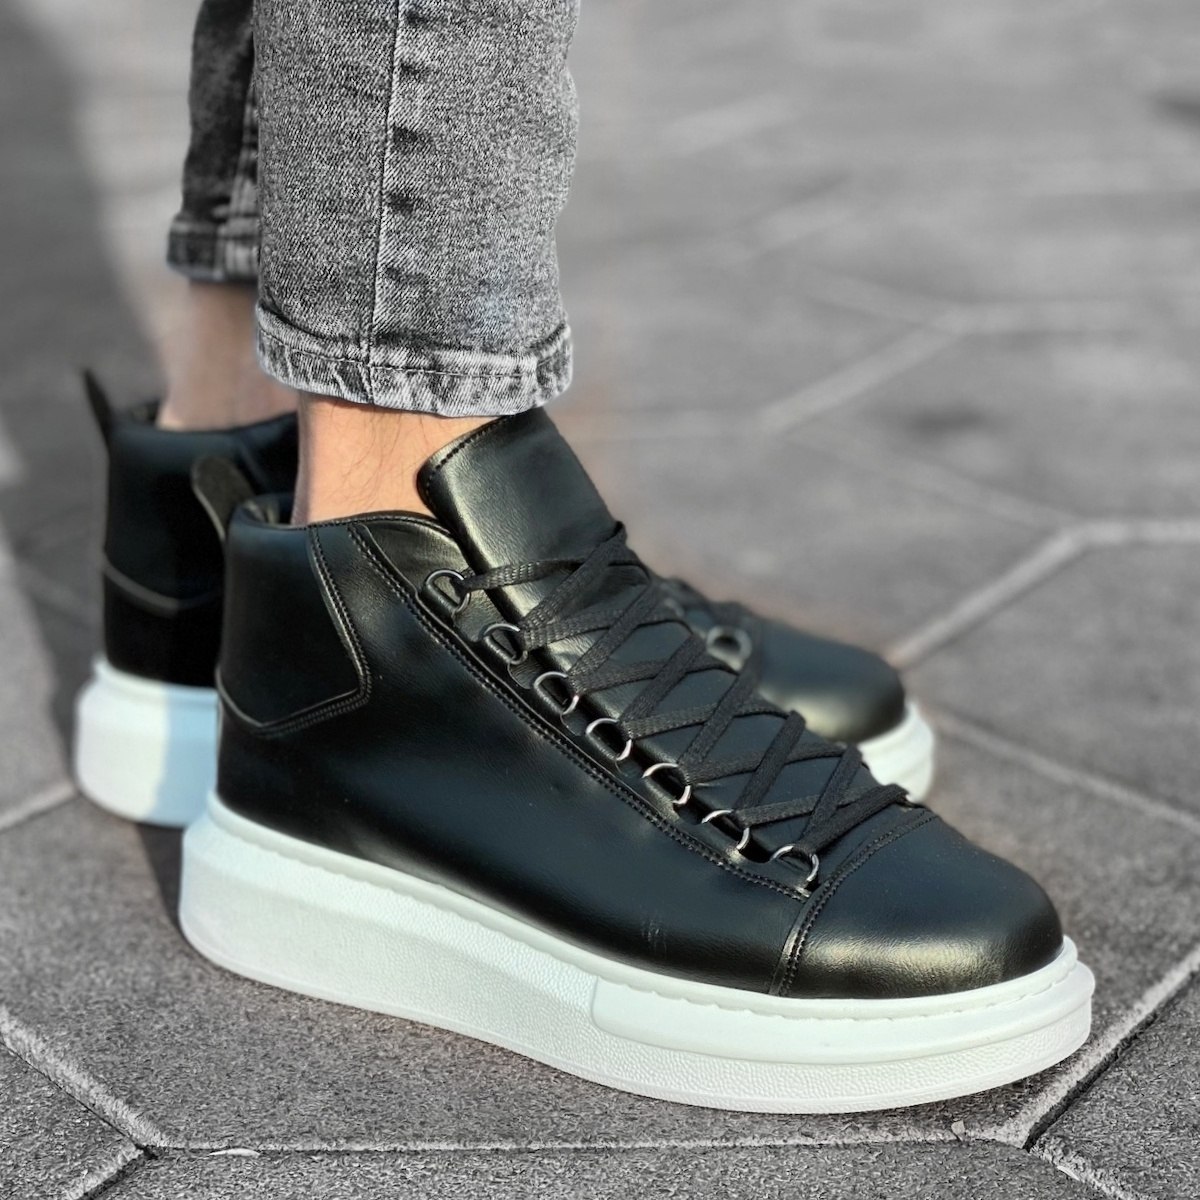 Hype Sole Mox High Top Sneakers In Black - 1